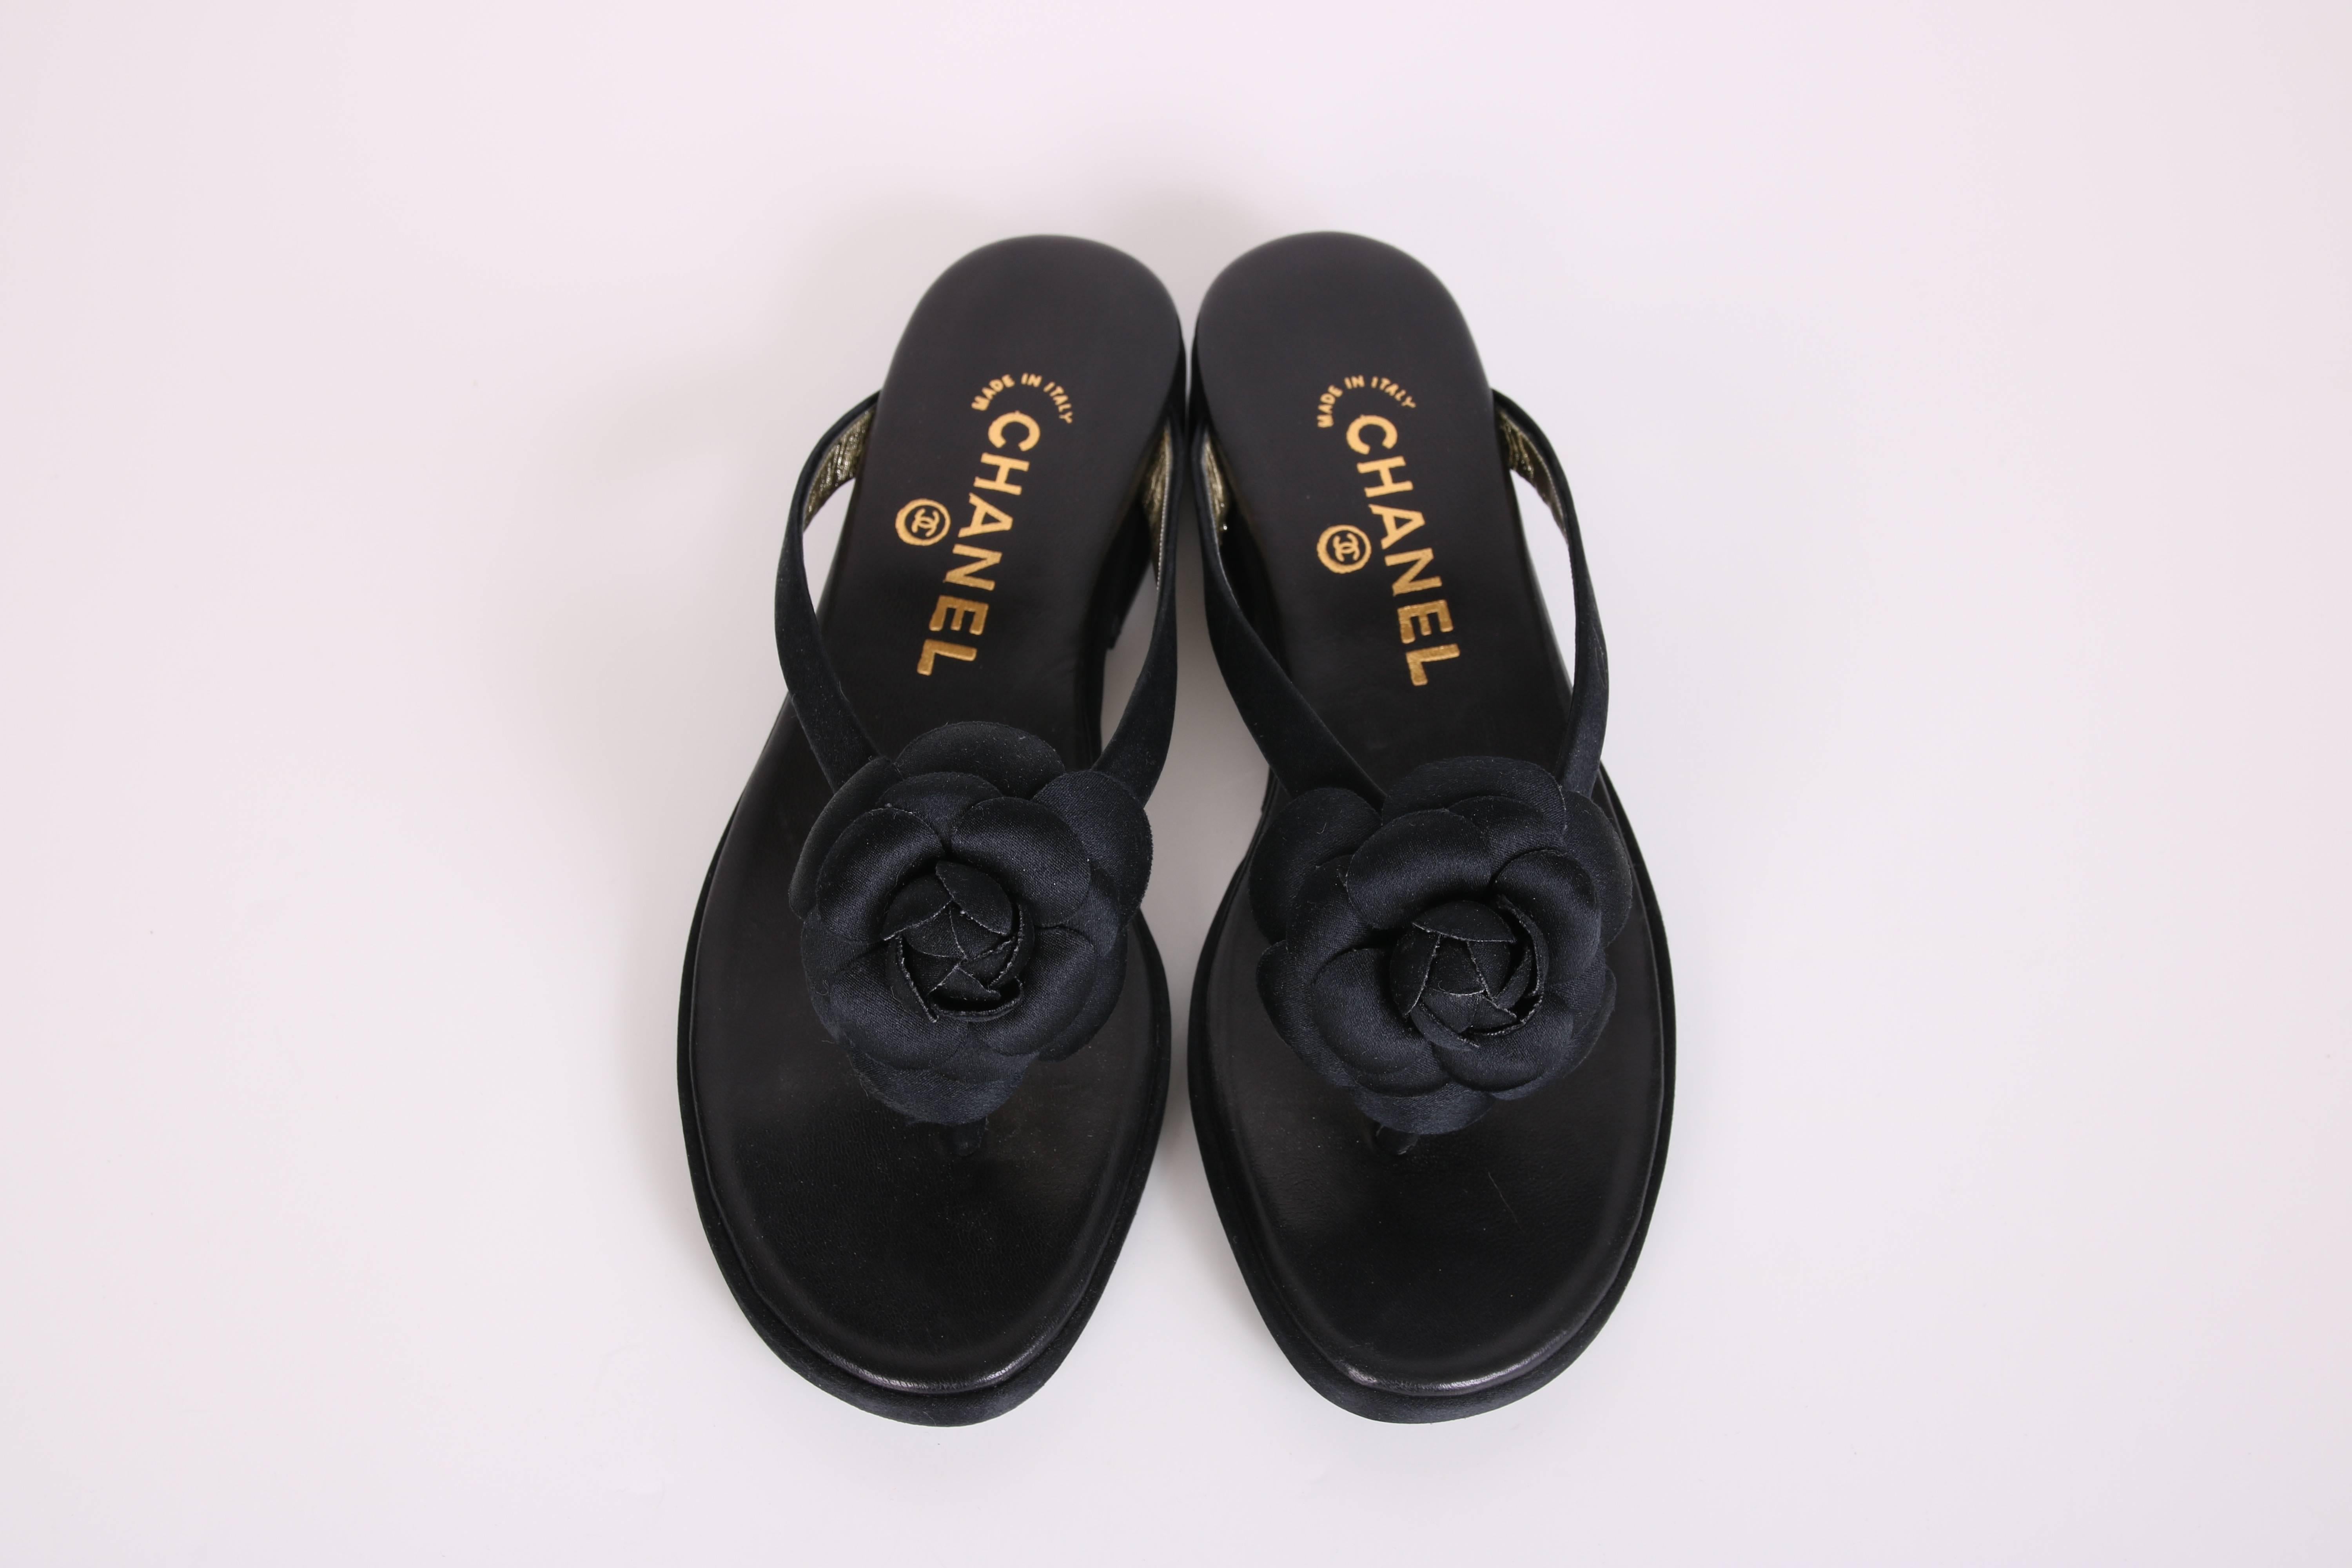 Never been worn, 1998 Chanel sandals in black satin with a black satin petaled camellia at each toe. The footpad is fabricated from black butter soft leather. Size 36.5. In excellent condition. Comes with original box and dust bag for each shoe.